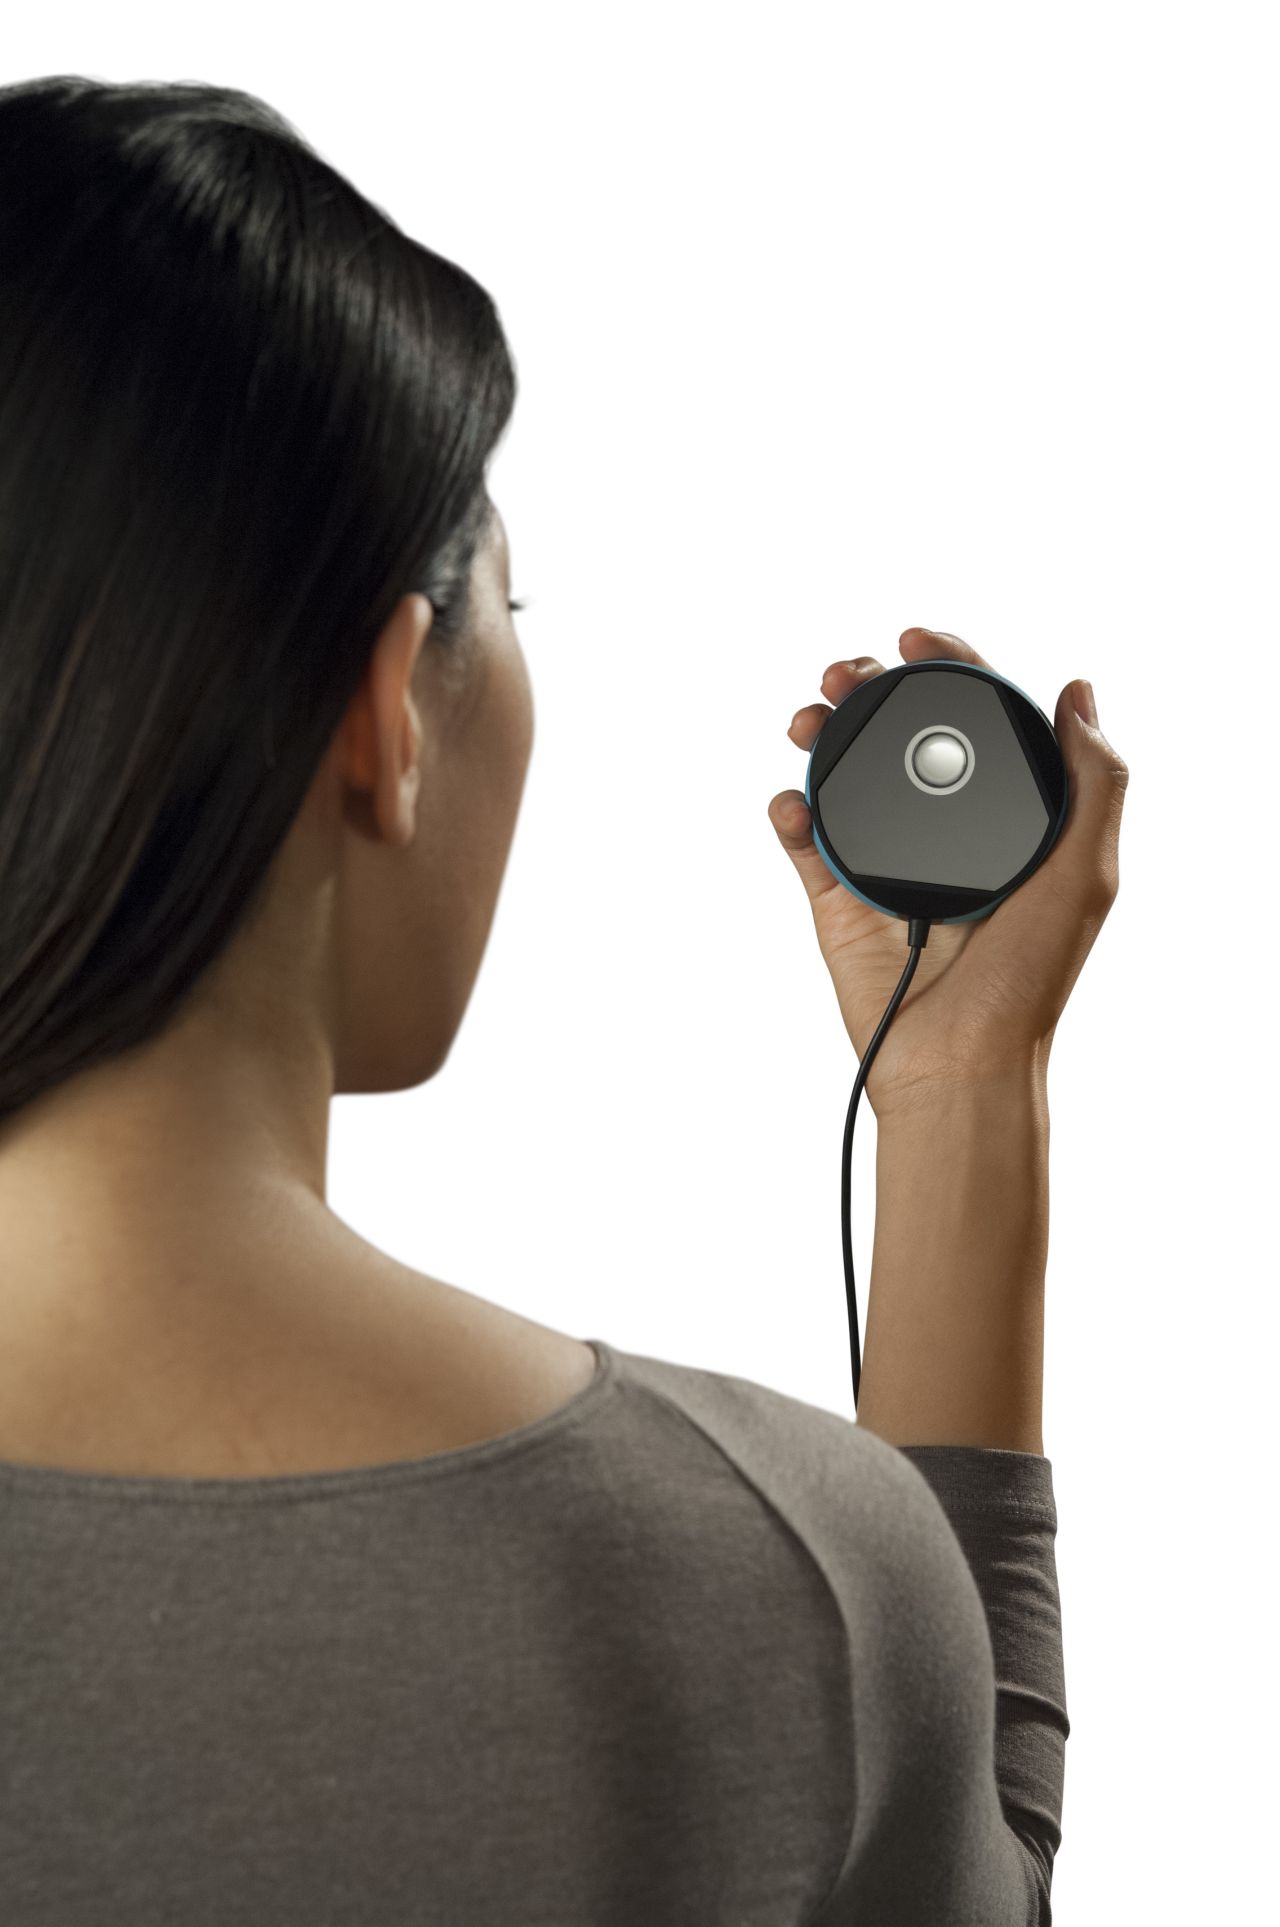 Unveiled in 2014 by eyeLock -- an iris-based identity technology company -- Myris is a palm-size device that scans the unique features of your eye. 